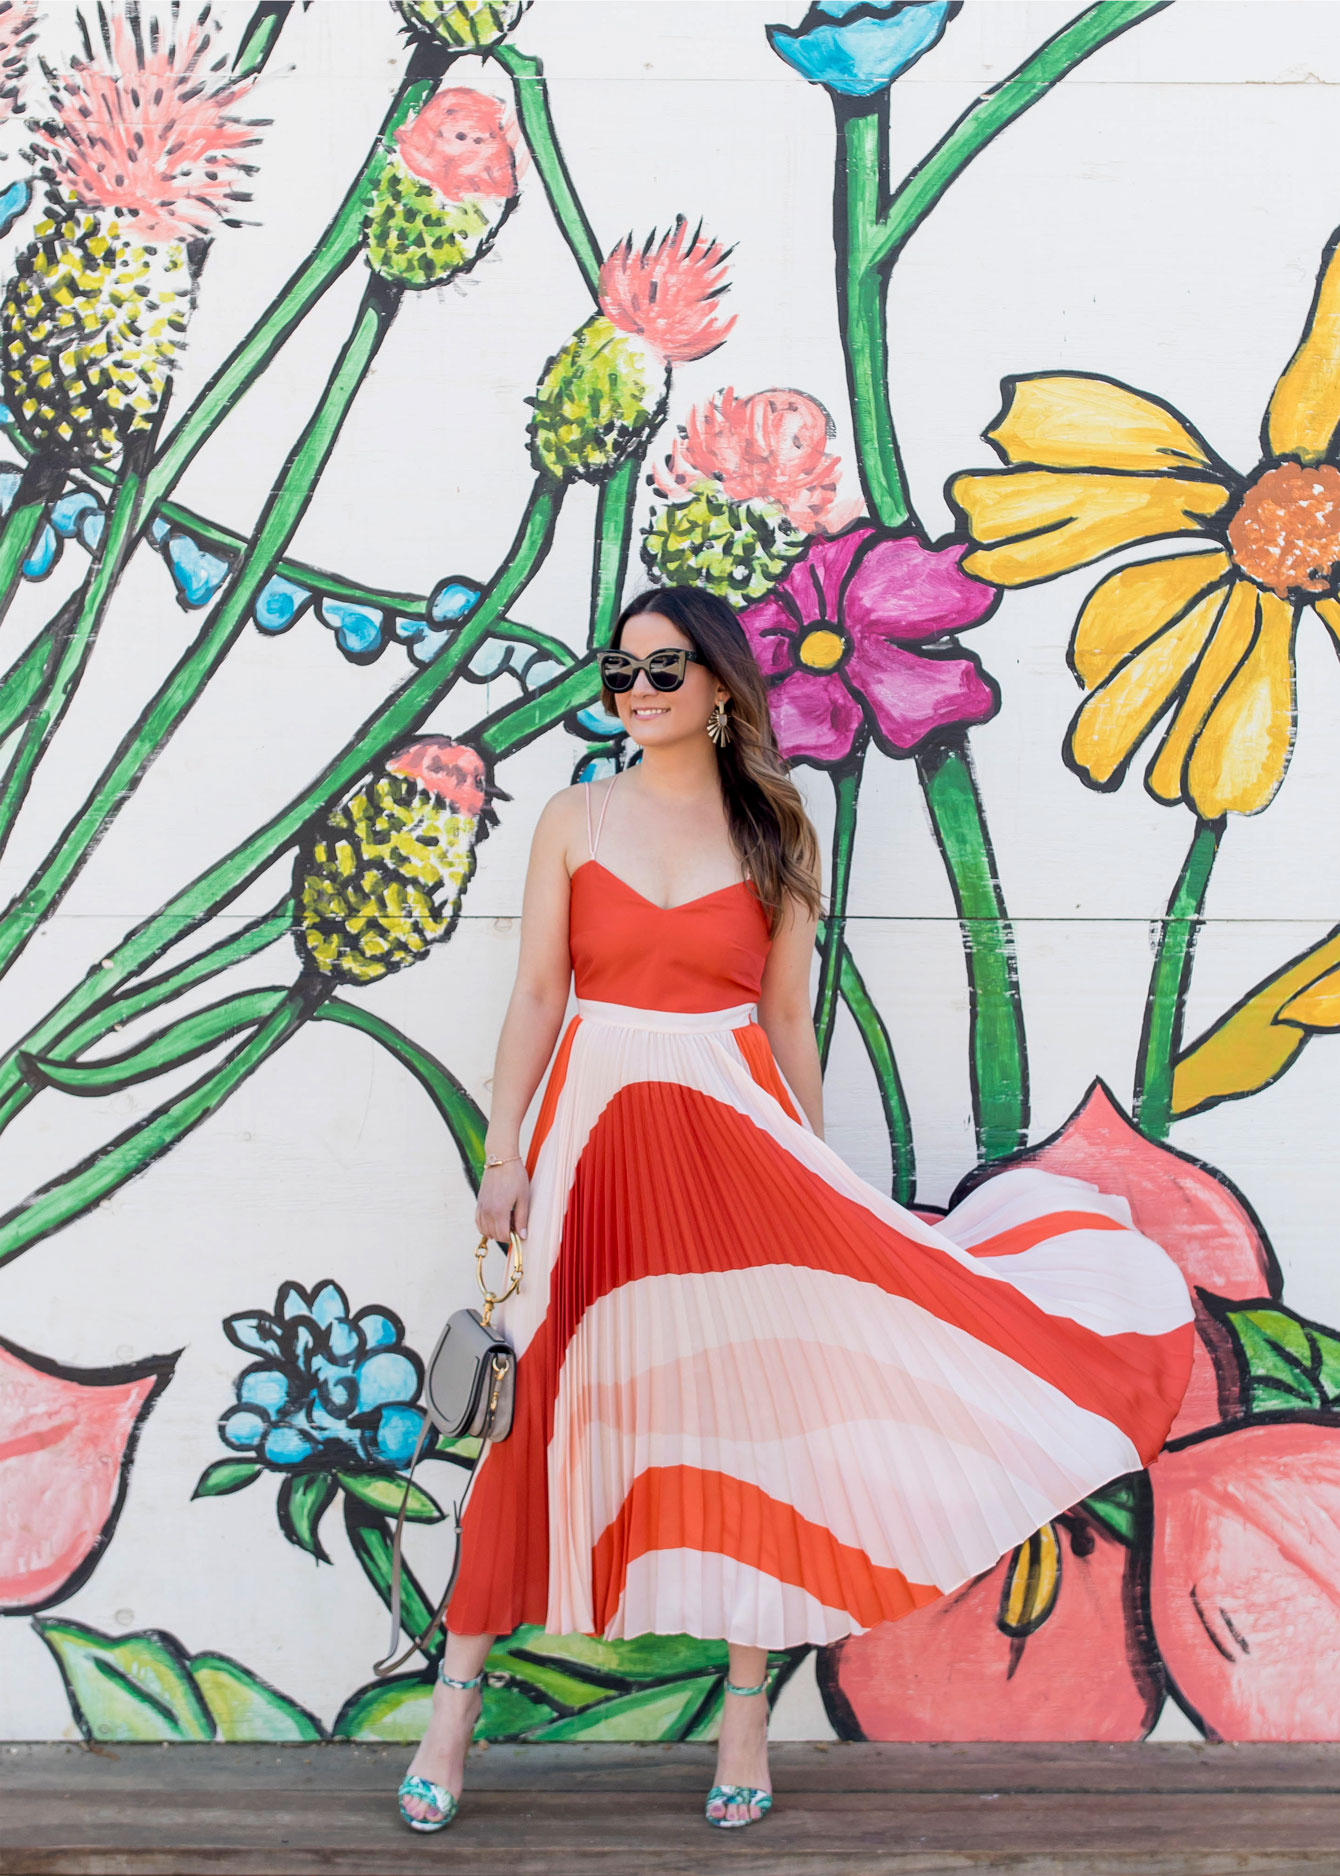 Mango Pleated Bicolor Dress at a Bishop Arts District Mural in Dallas